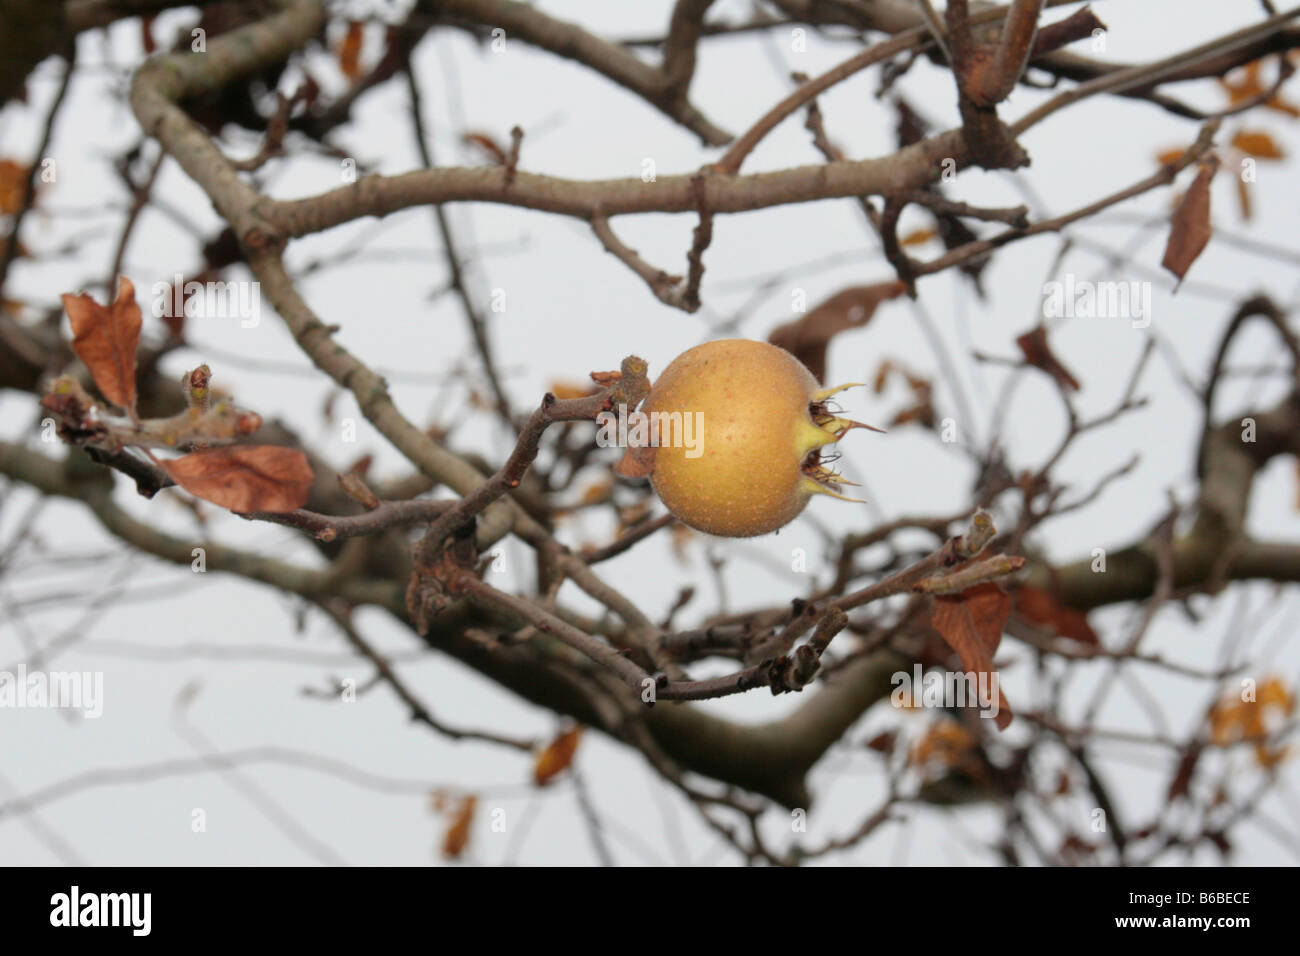 Medler a deciduous European tree (Mespilus germanica) having white flowers and edible apple-shaped fruit. Stock Photo